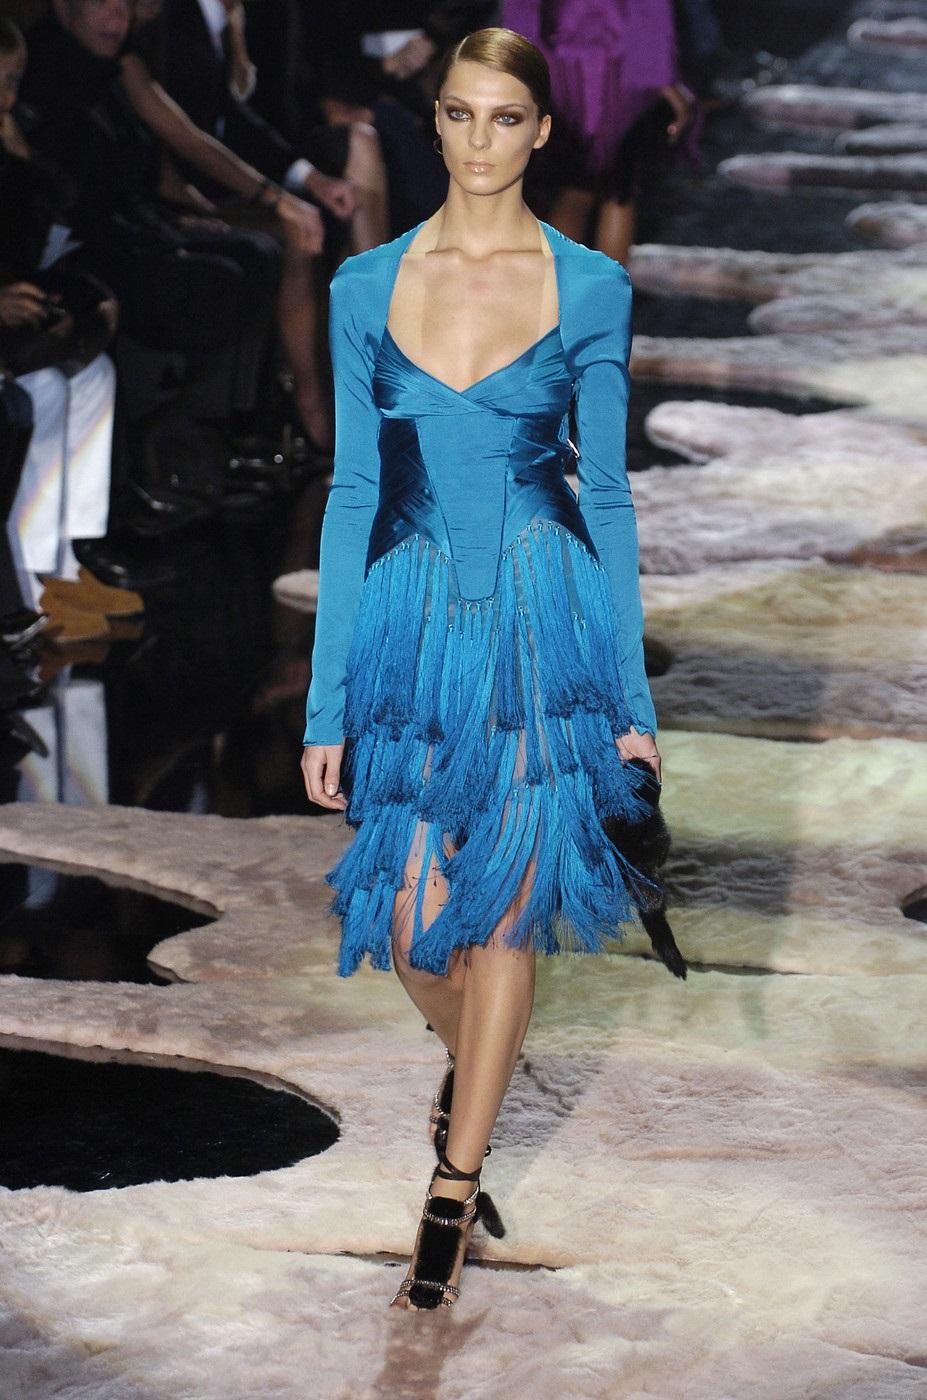 New Tom Ford for Gucci Runway Caribbean Blue Fringe Tassel Dress
F/W 2004 Runway Collection
The Most Seductive and Romantic Dress Ever!
Designer size 38 - US 2
Bustier Style, 80% Silk , 15% Nylon, 5% Spandex., Side Zip Closure, Sleeve Zip Closure,